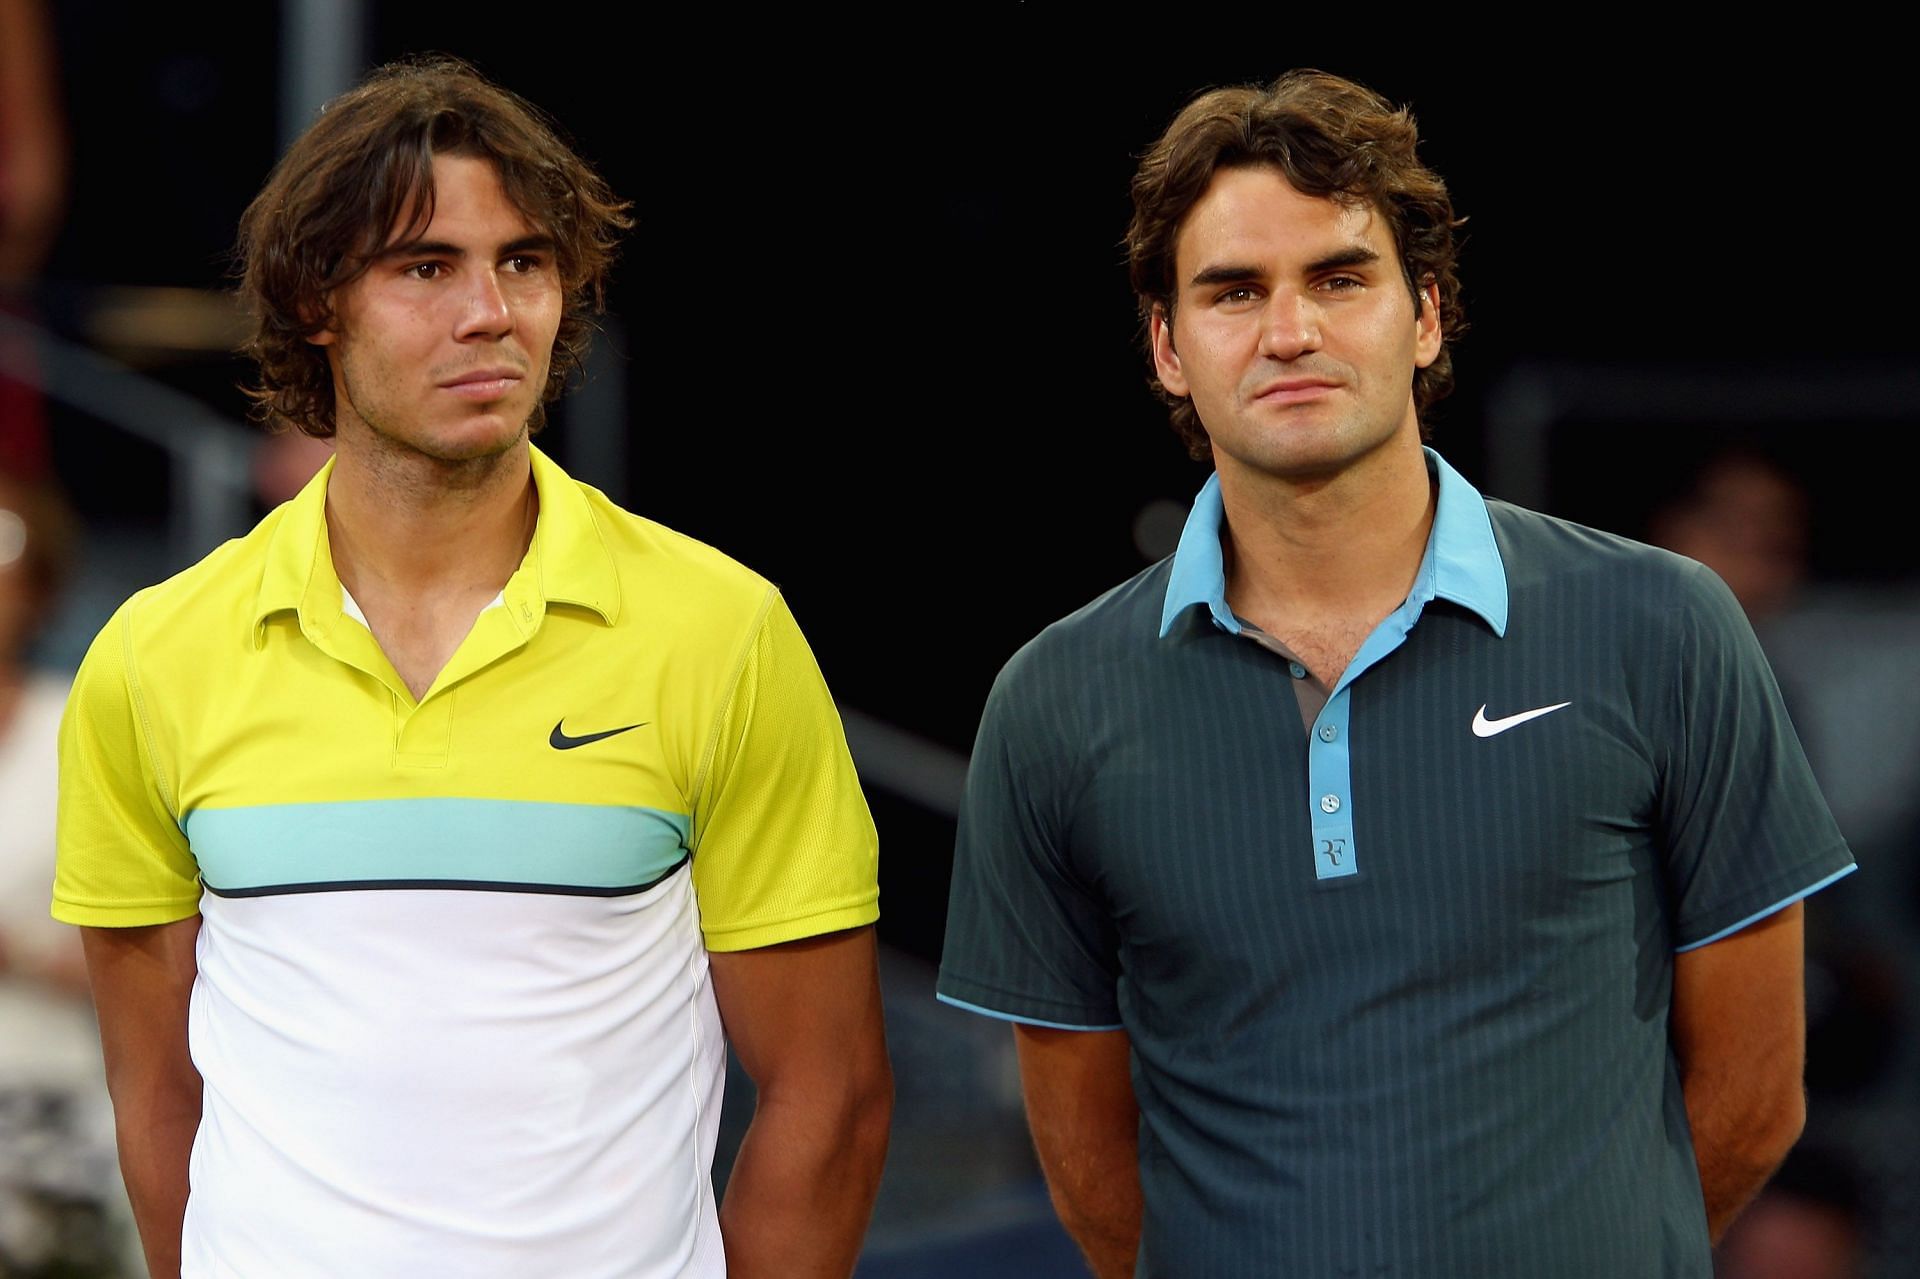 Roger Federer and Rafael Nadal after the Madrid Open final in 2009